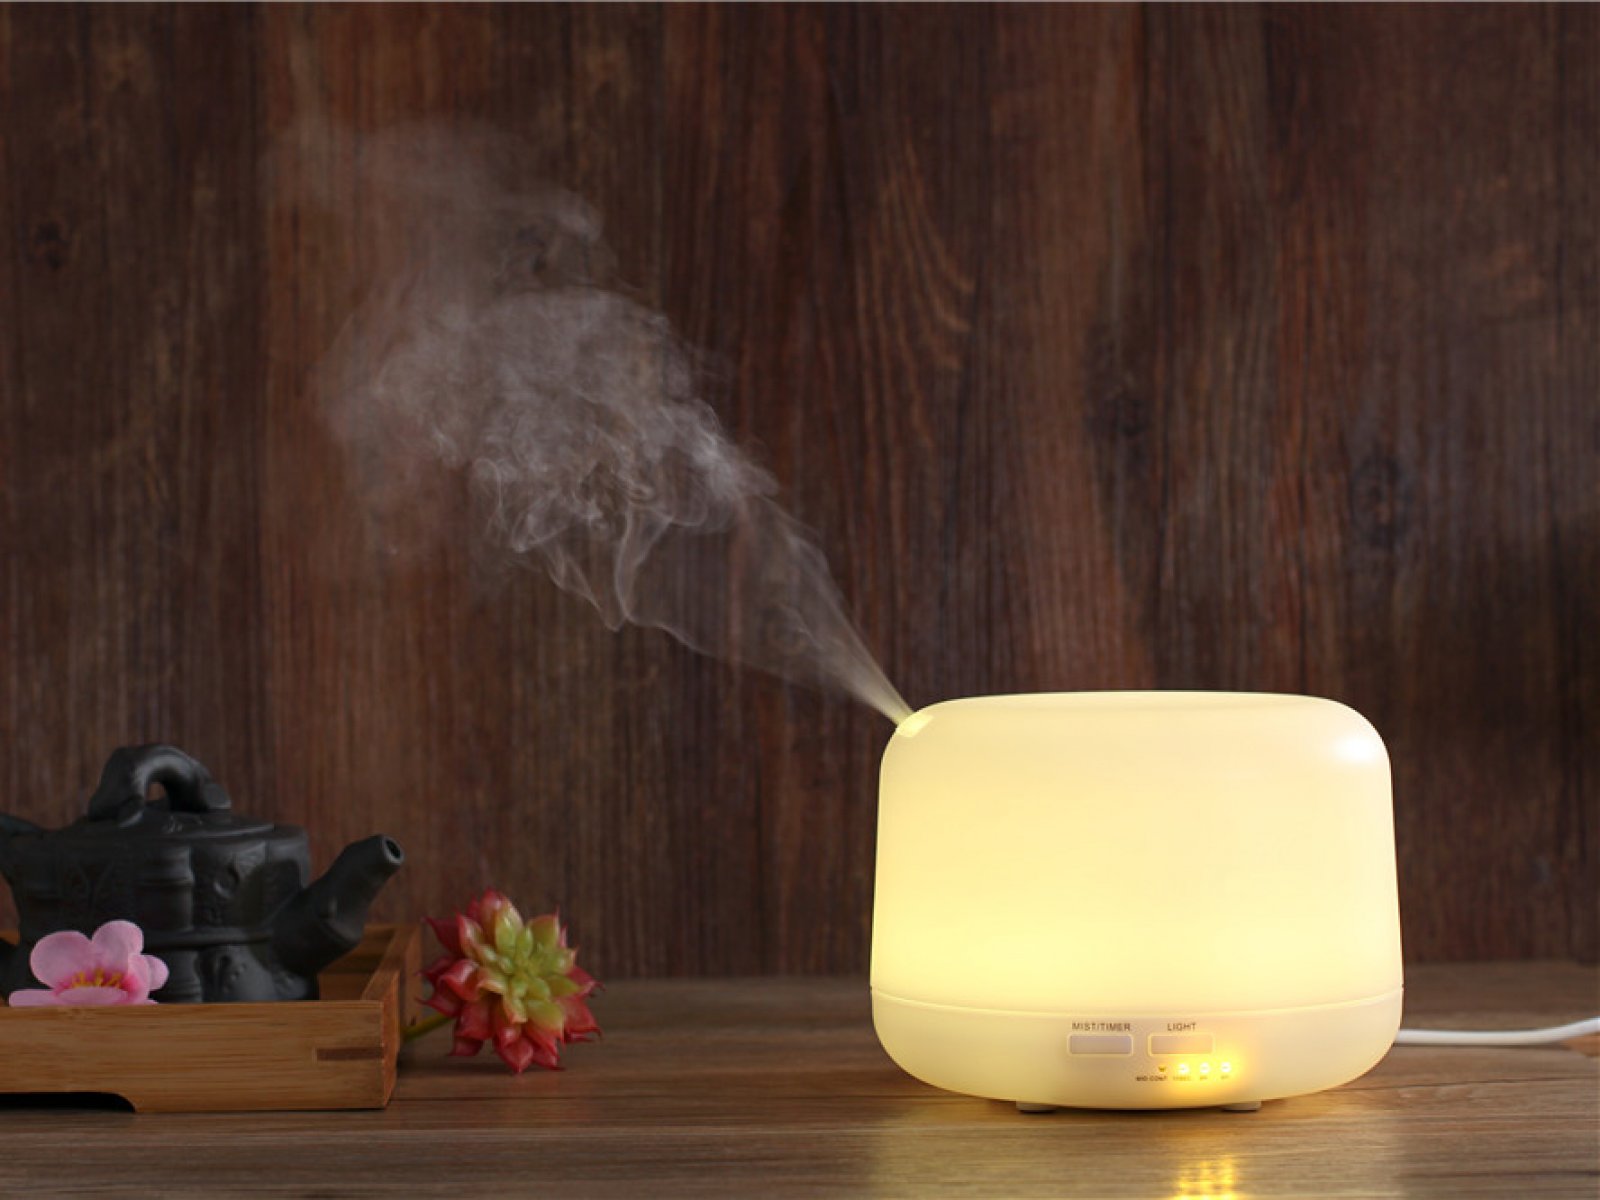 Aroma diffuser FAVORIT + essential oil blend BEWIT 33, 5 ml -  - 11